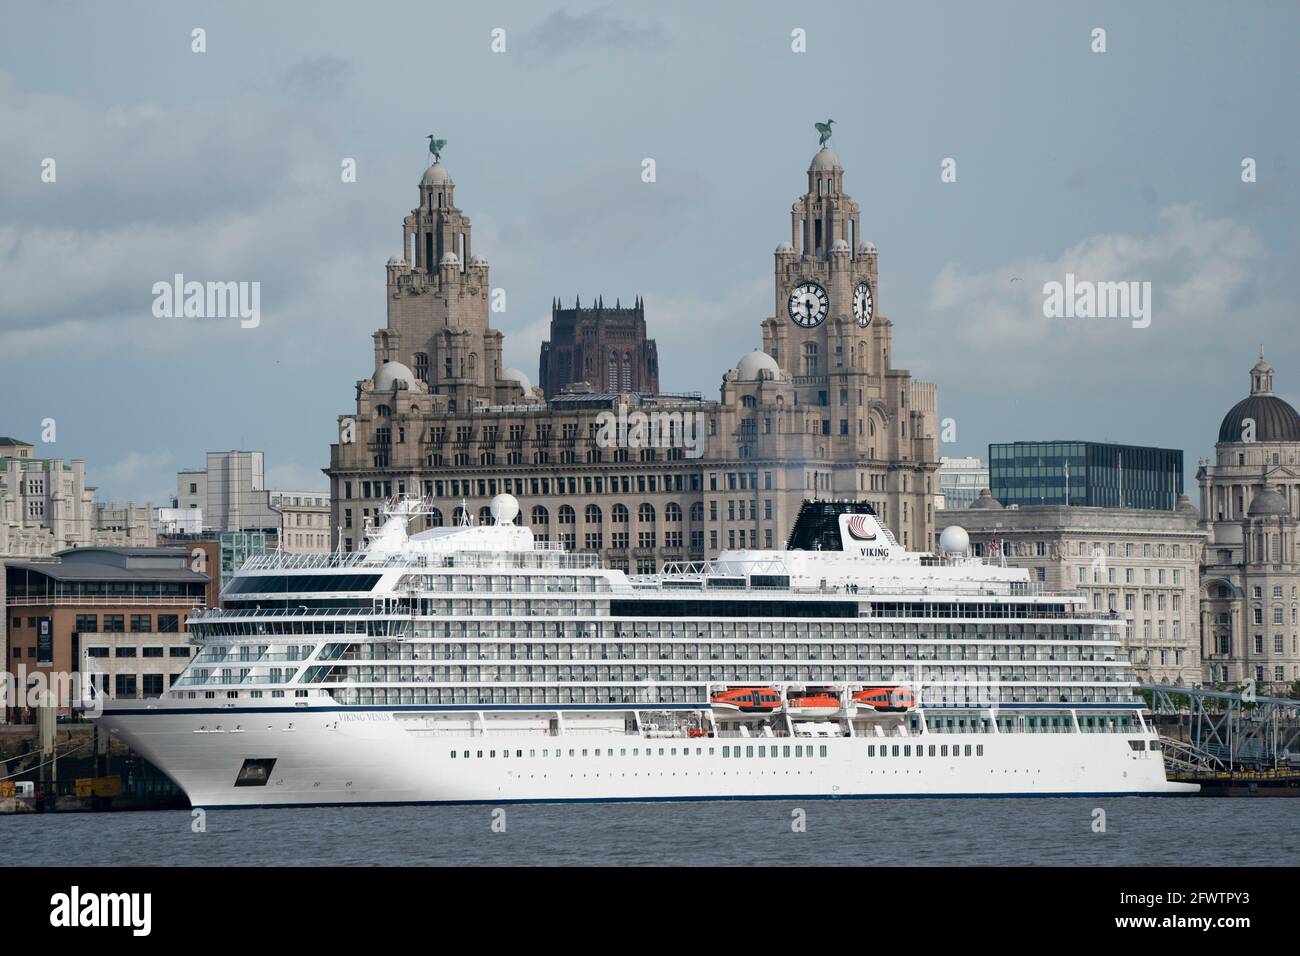 Liverpool, UK, 24th May 2021. The Viking Venus a brand new ship will leaves Liverpool after her first visit to the city launch the cruise season. Liverpool Cruise Terminal is expecting around 80 cruise ships as lockdown restrictions ease. Credit: Jon Super/Alamy Live News. Stock Photo